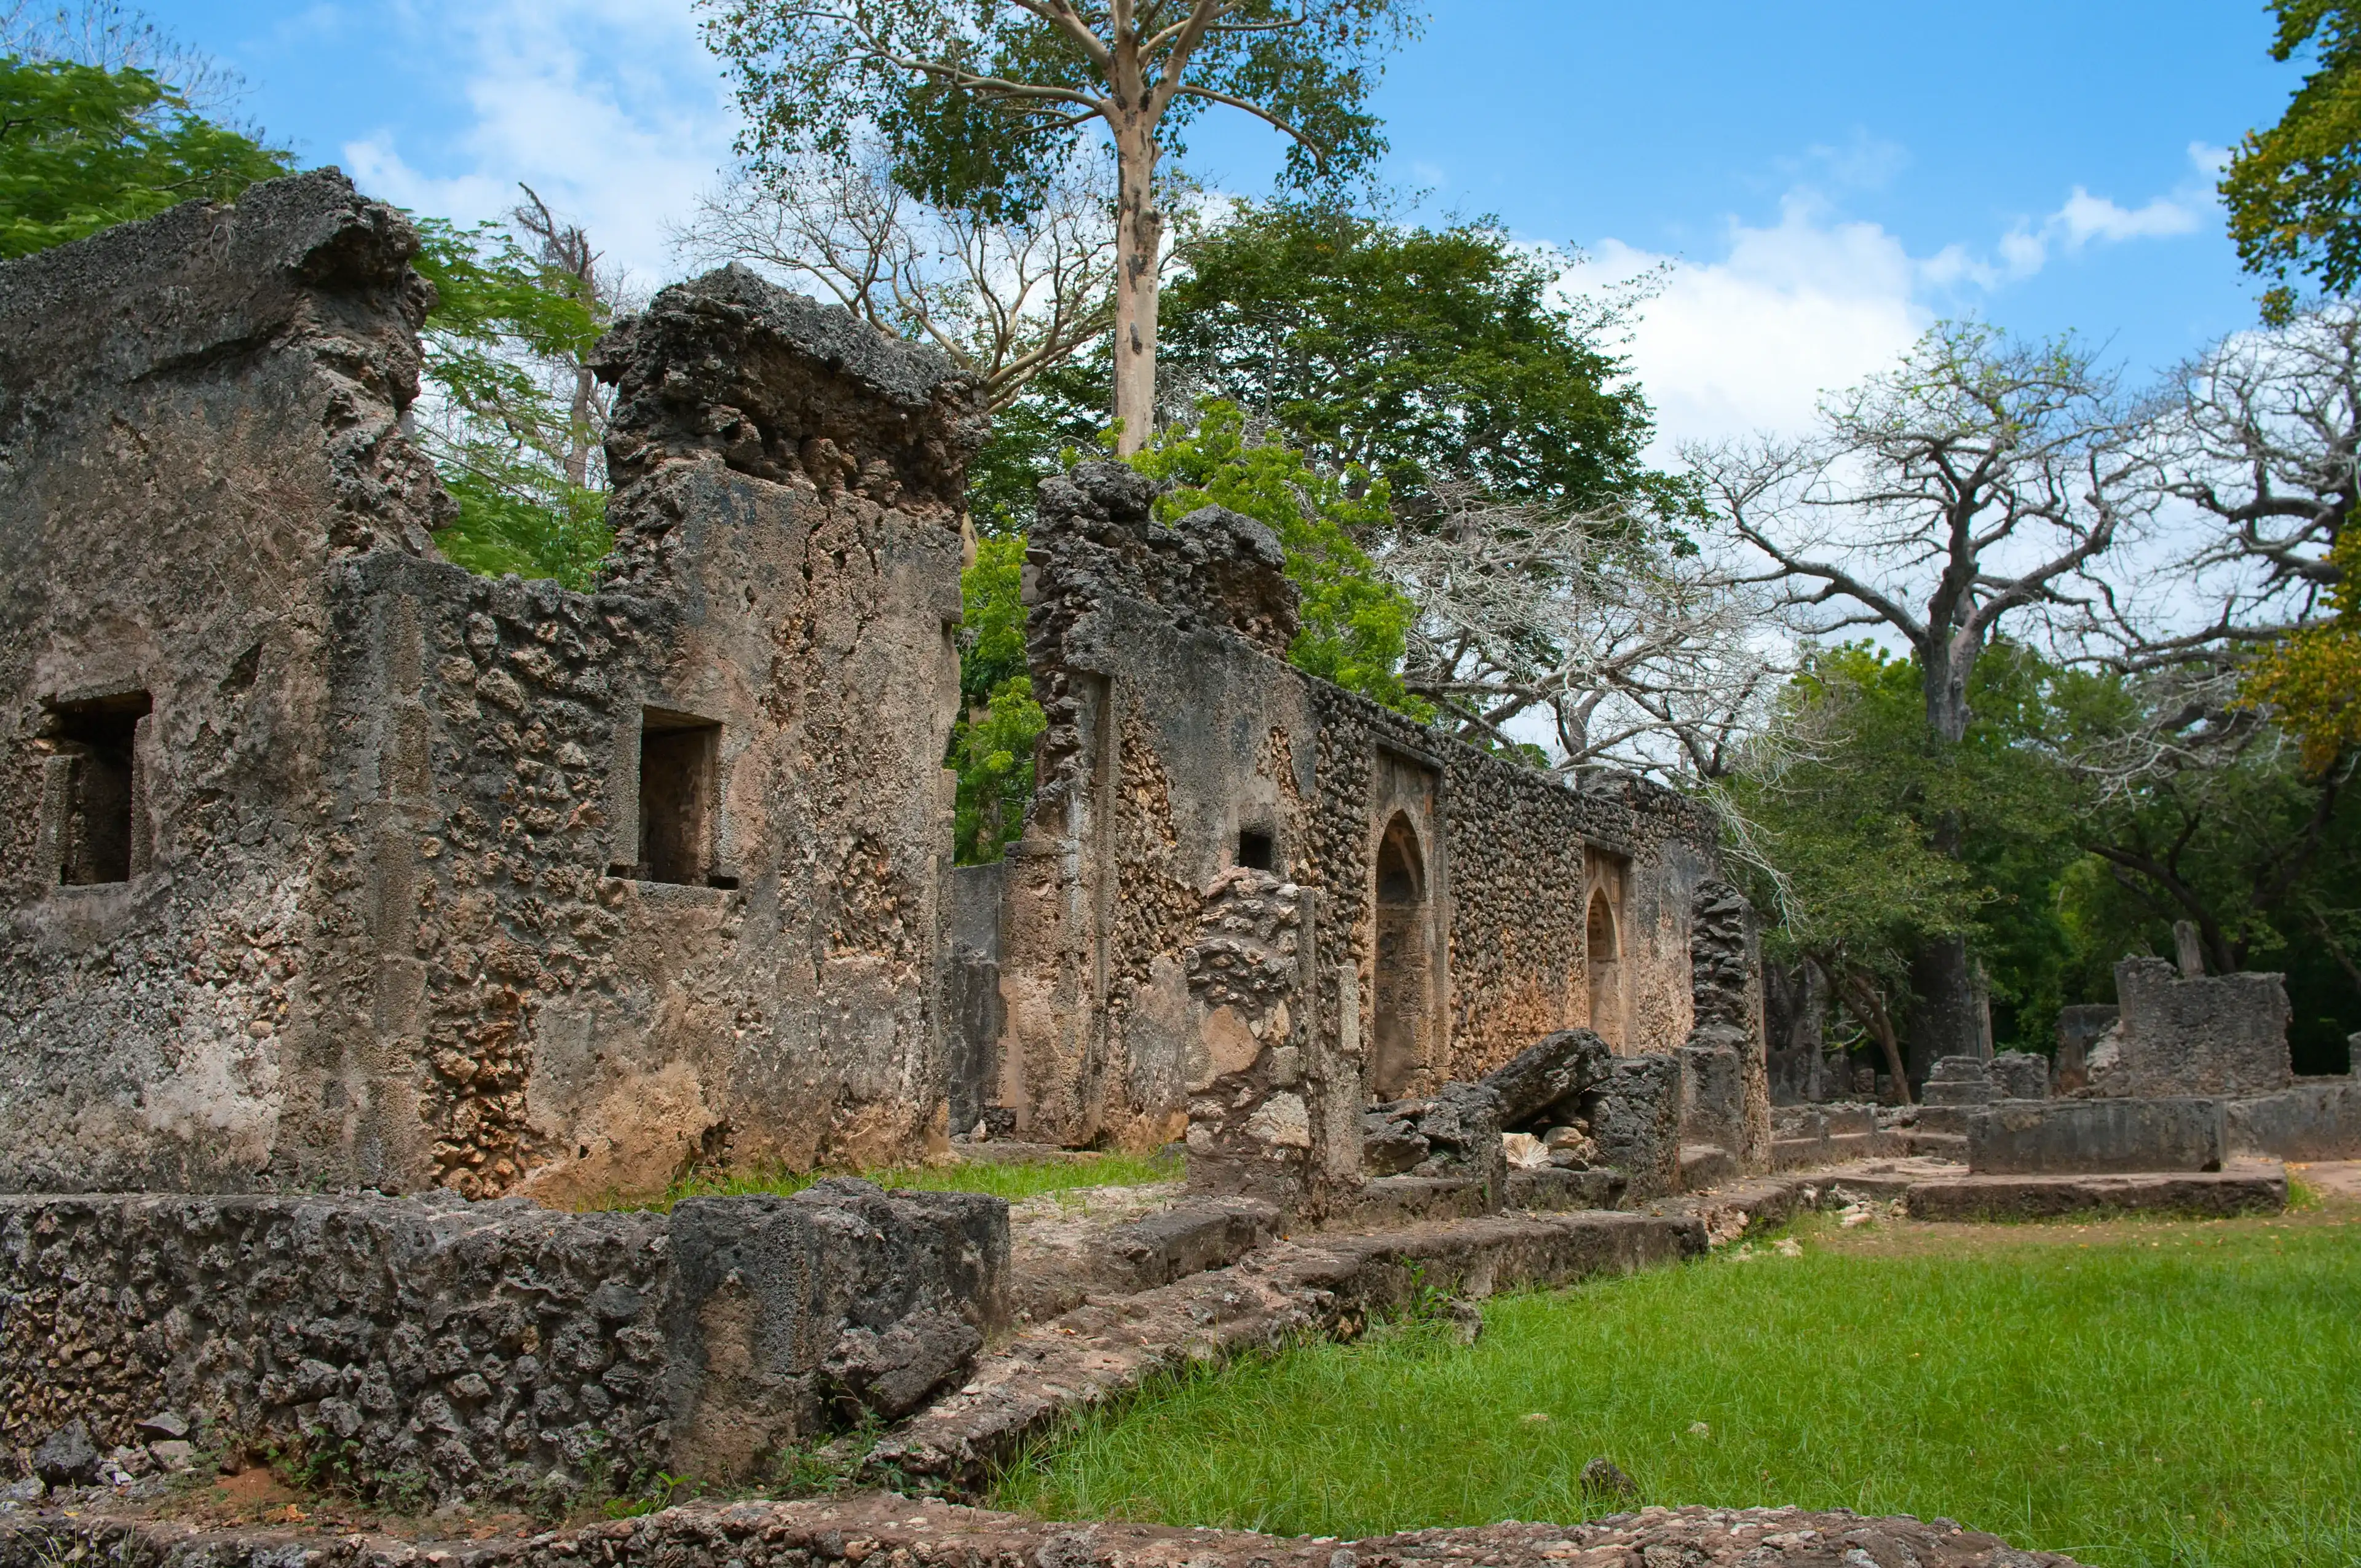 Remains of Gede, near the town Malindi in Kenya, Africa